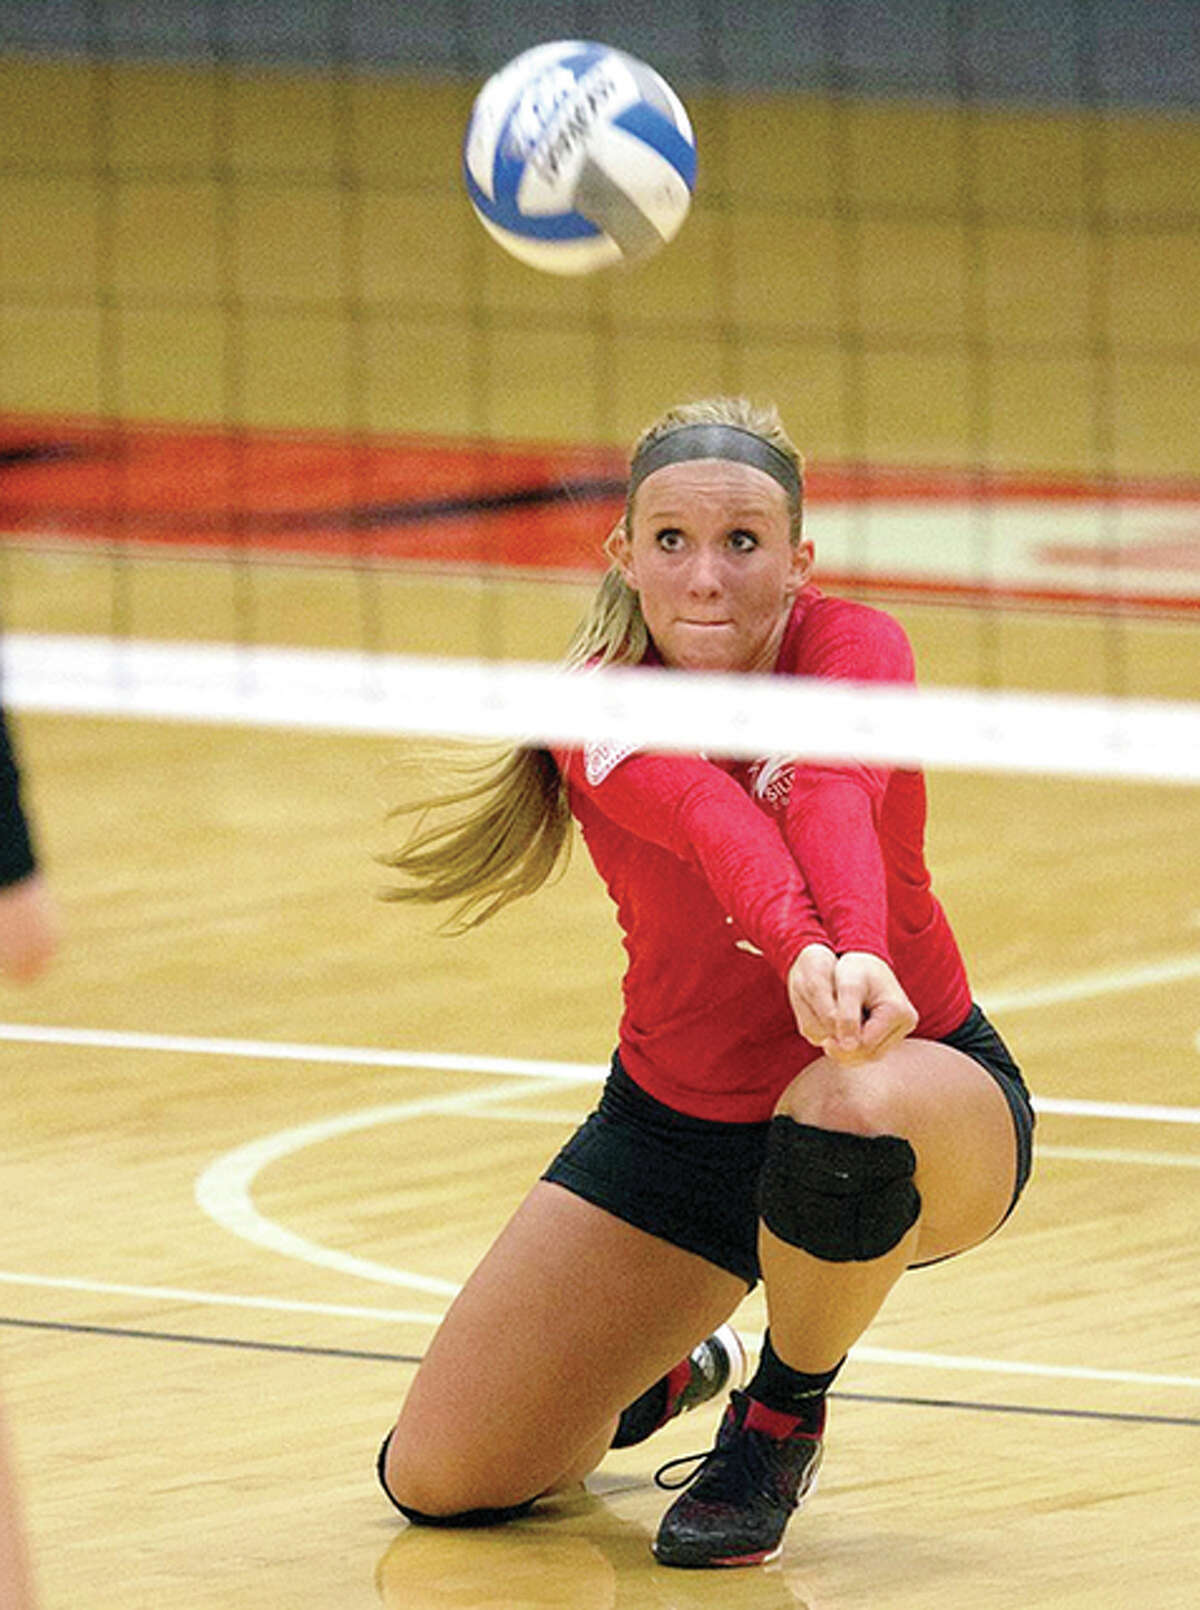 Katie Shashack, a sophomore from Edwardsville, led SIUE with 22 digs in Wednesday night’s volleyball action at Eastern Illinois University.